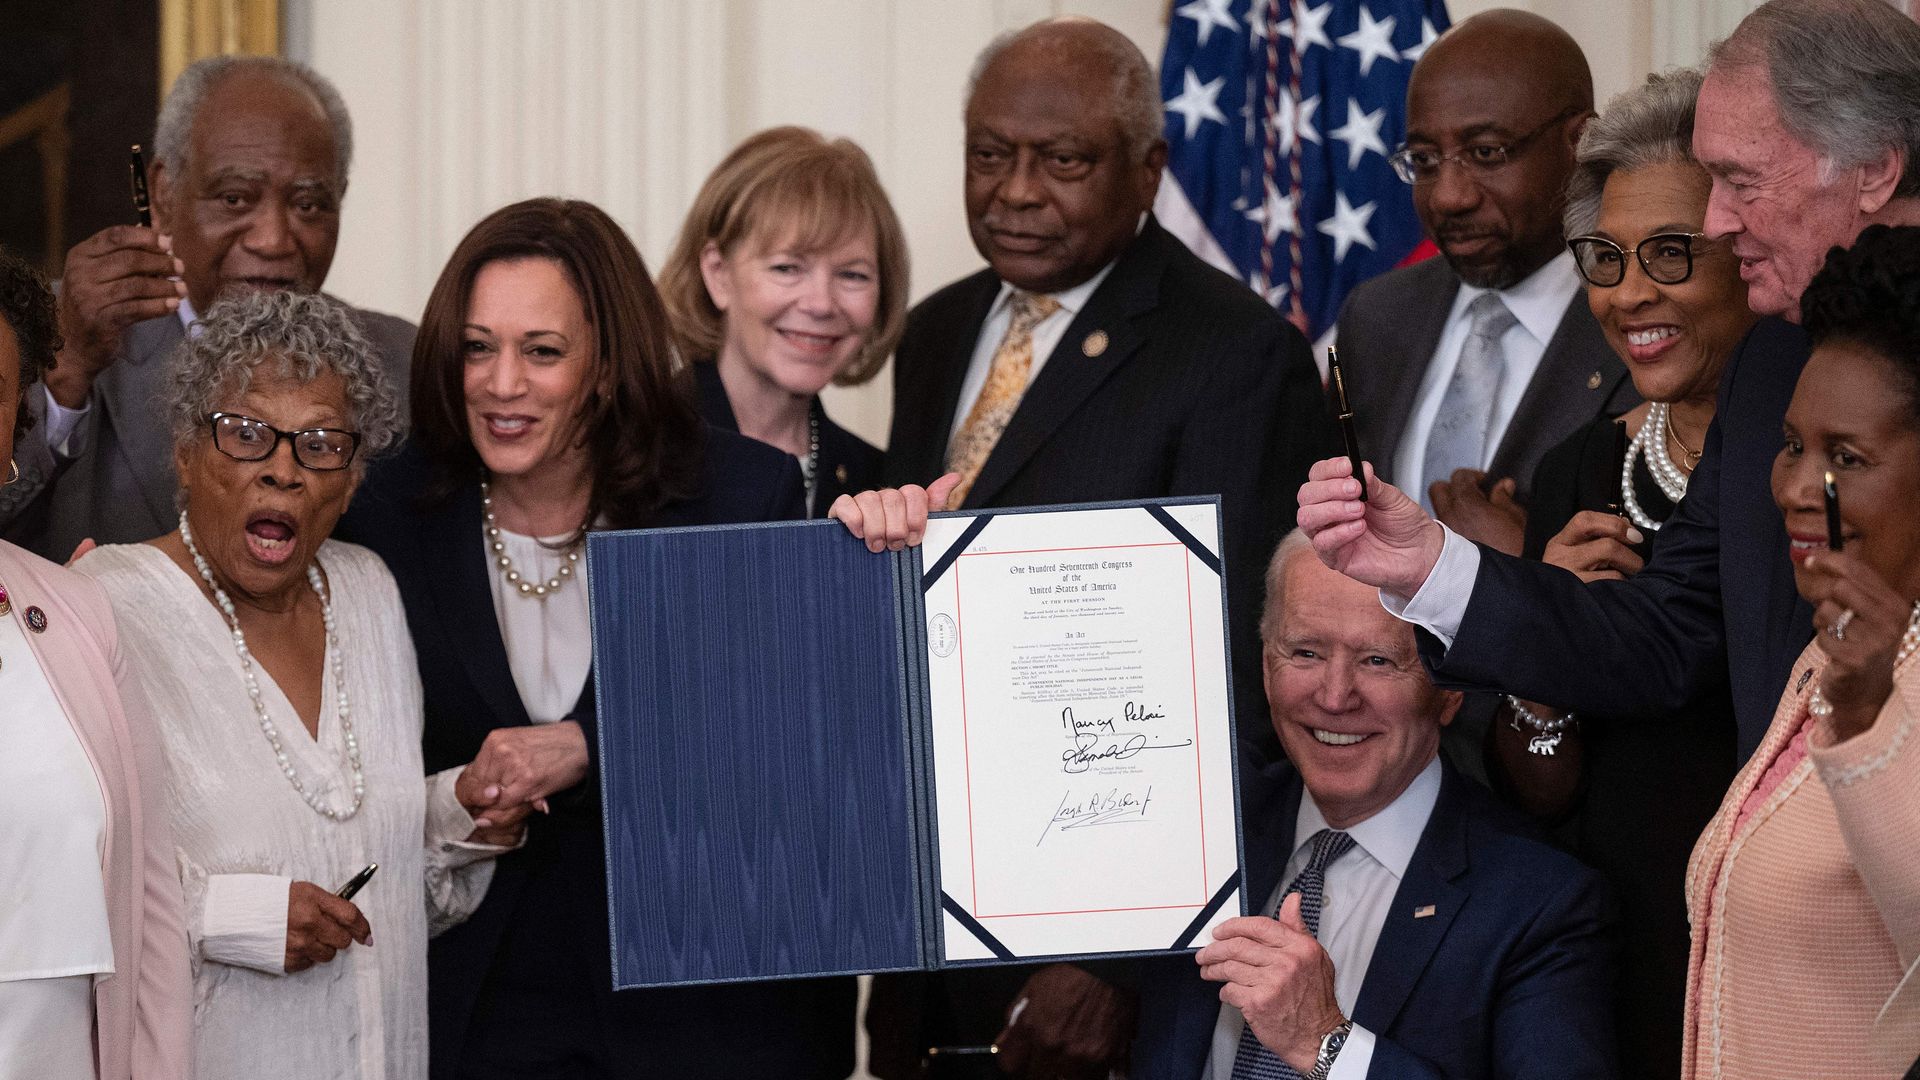 President Biden and Vice President Harris with members of Congress after the signing in the White House on June 17.